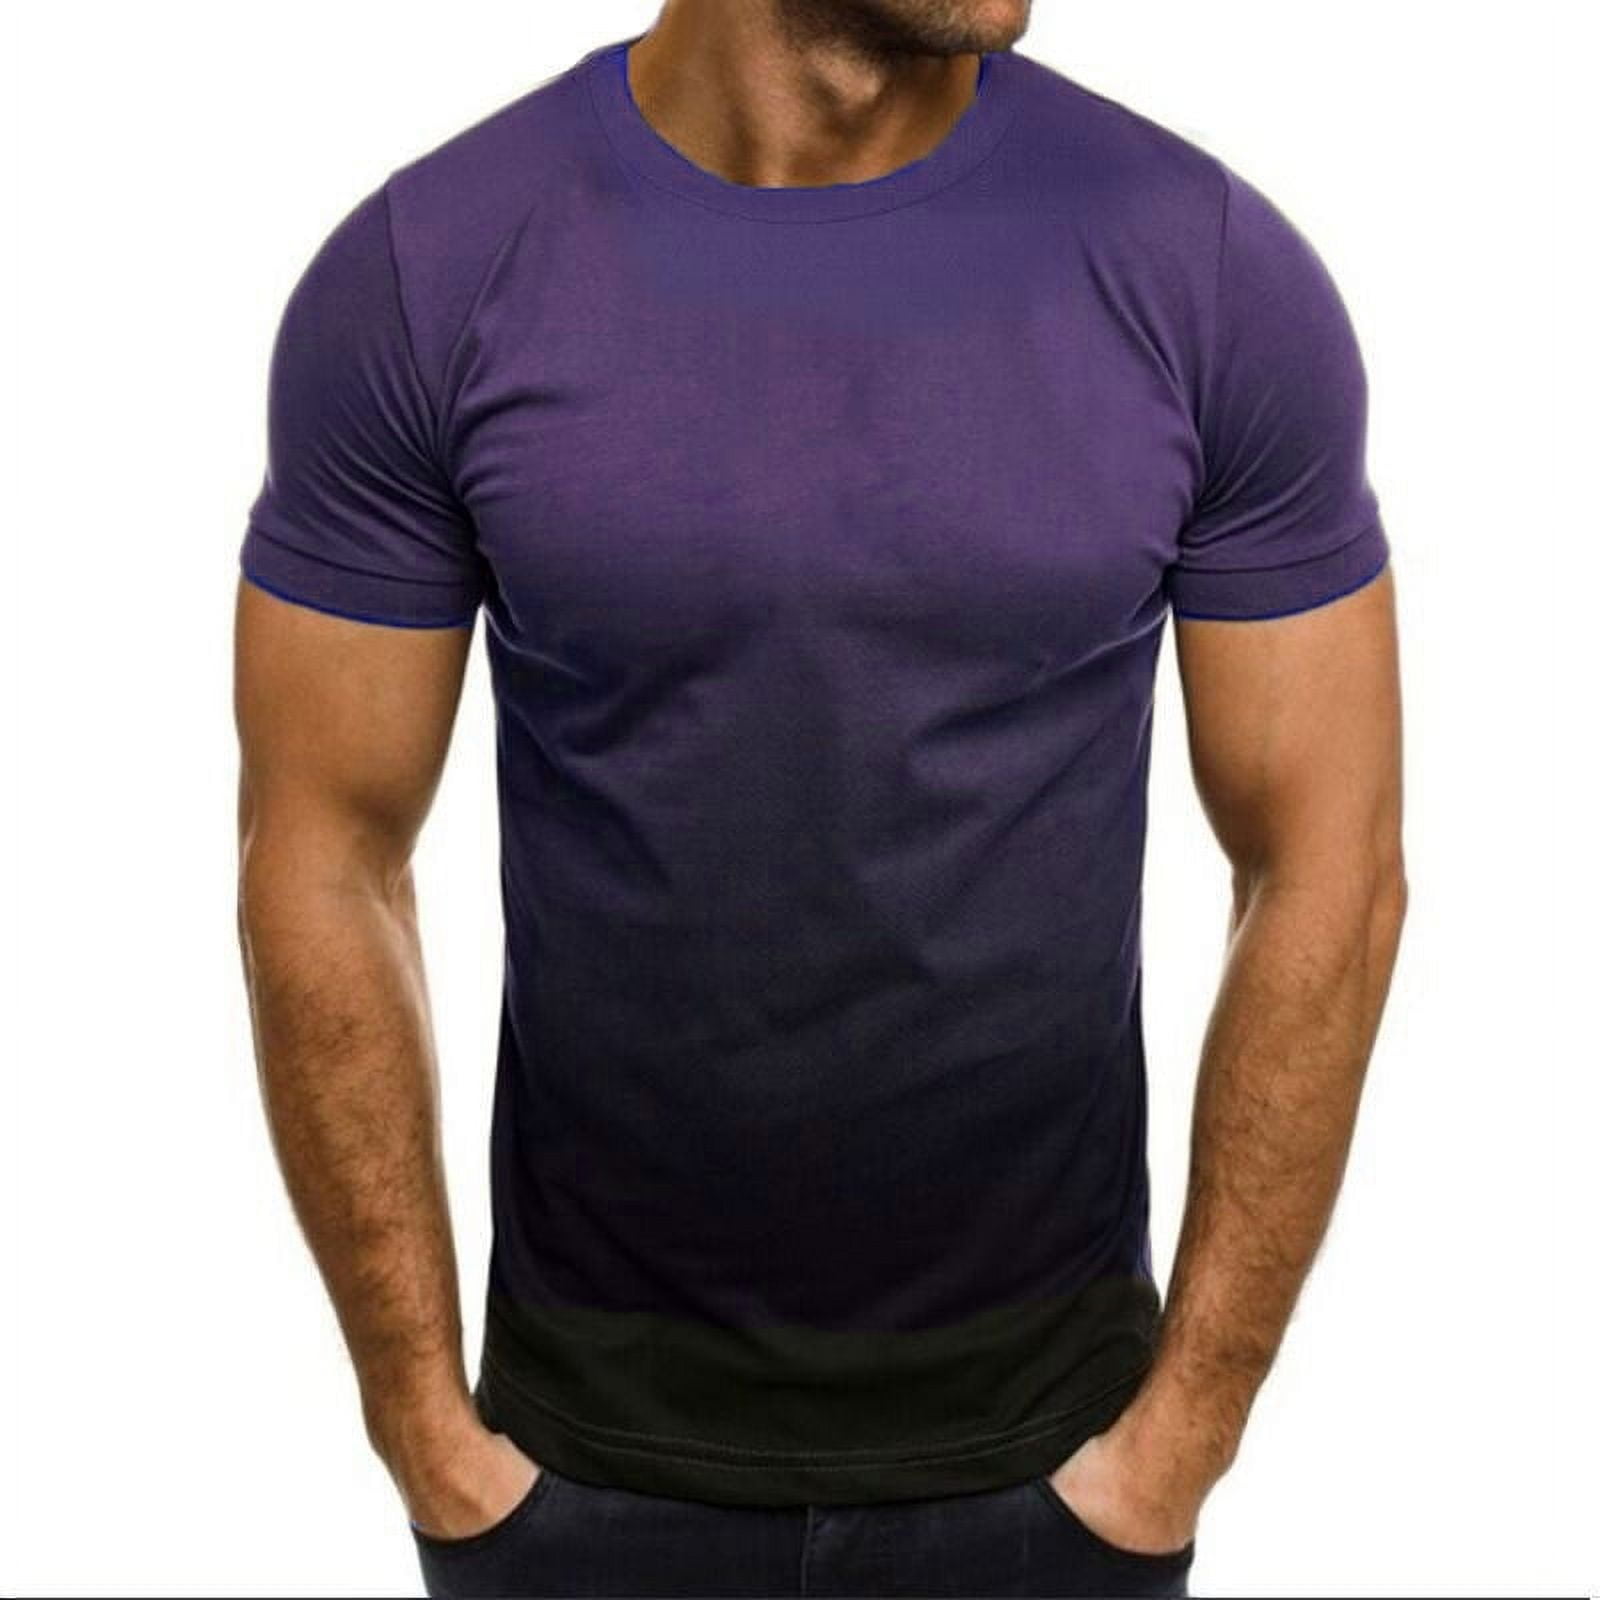 AXXD Purple Workout Shirts For Men Slim T-Shirt Contrast Color Tee ...